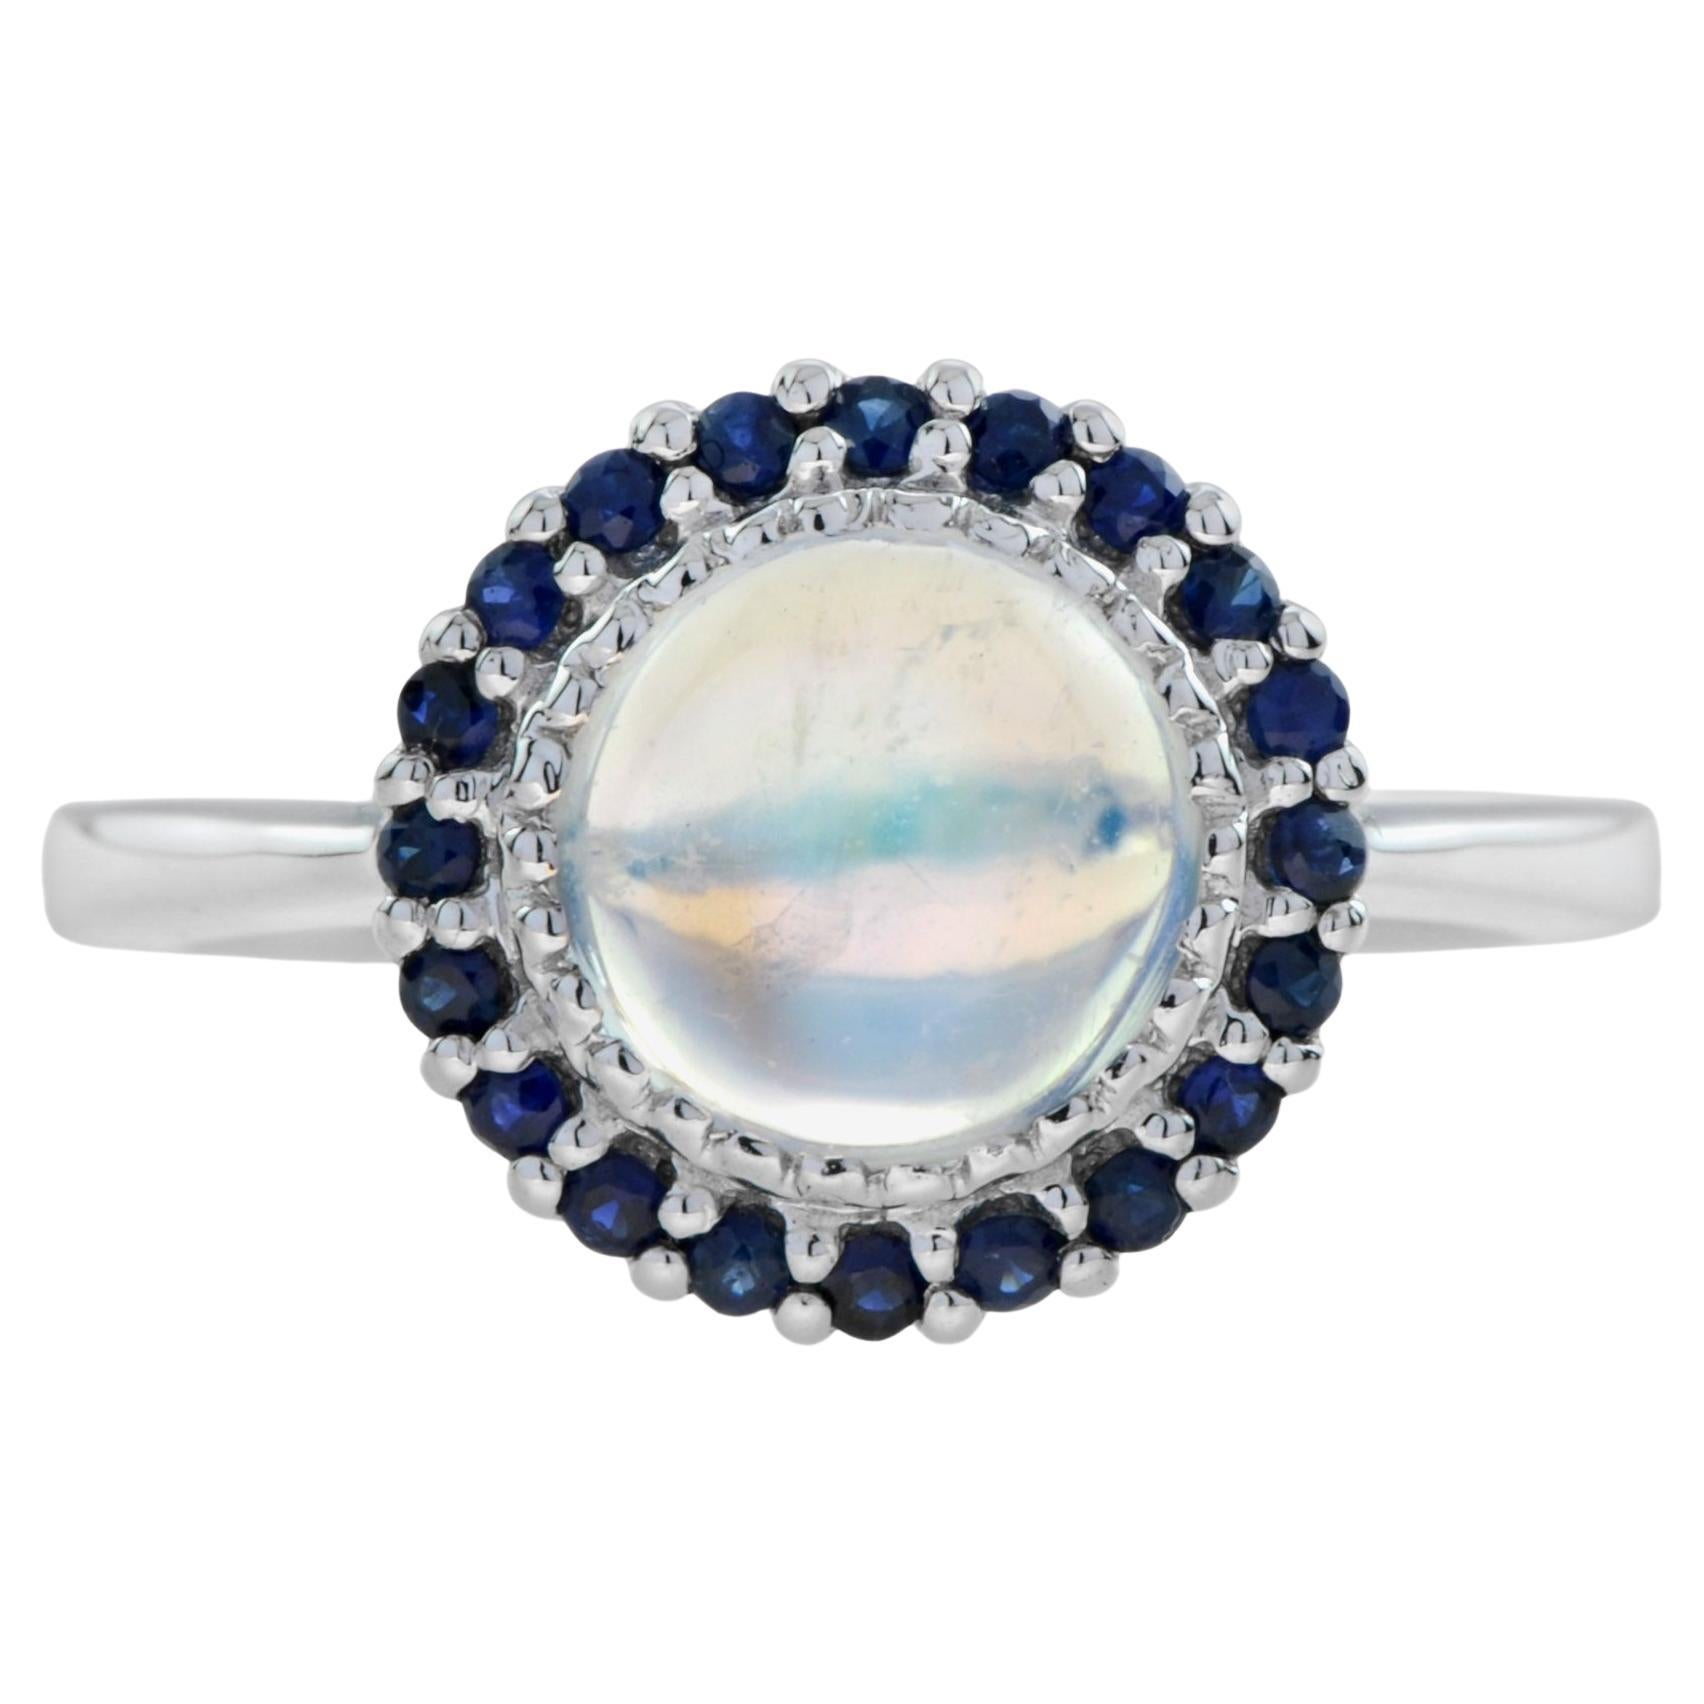 For Sale:  Moonstone and Sapphire Vintage Style Halo Ring in 10k White Gold